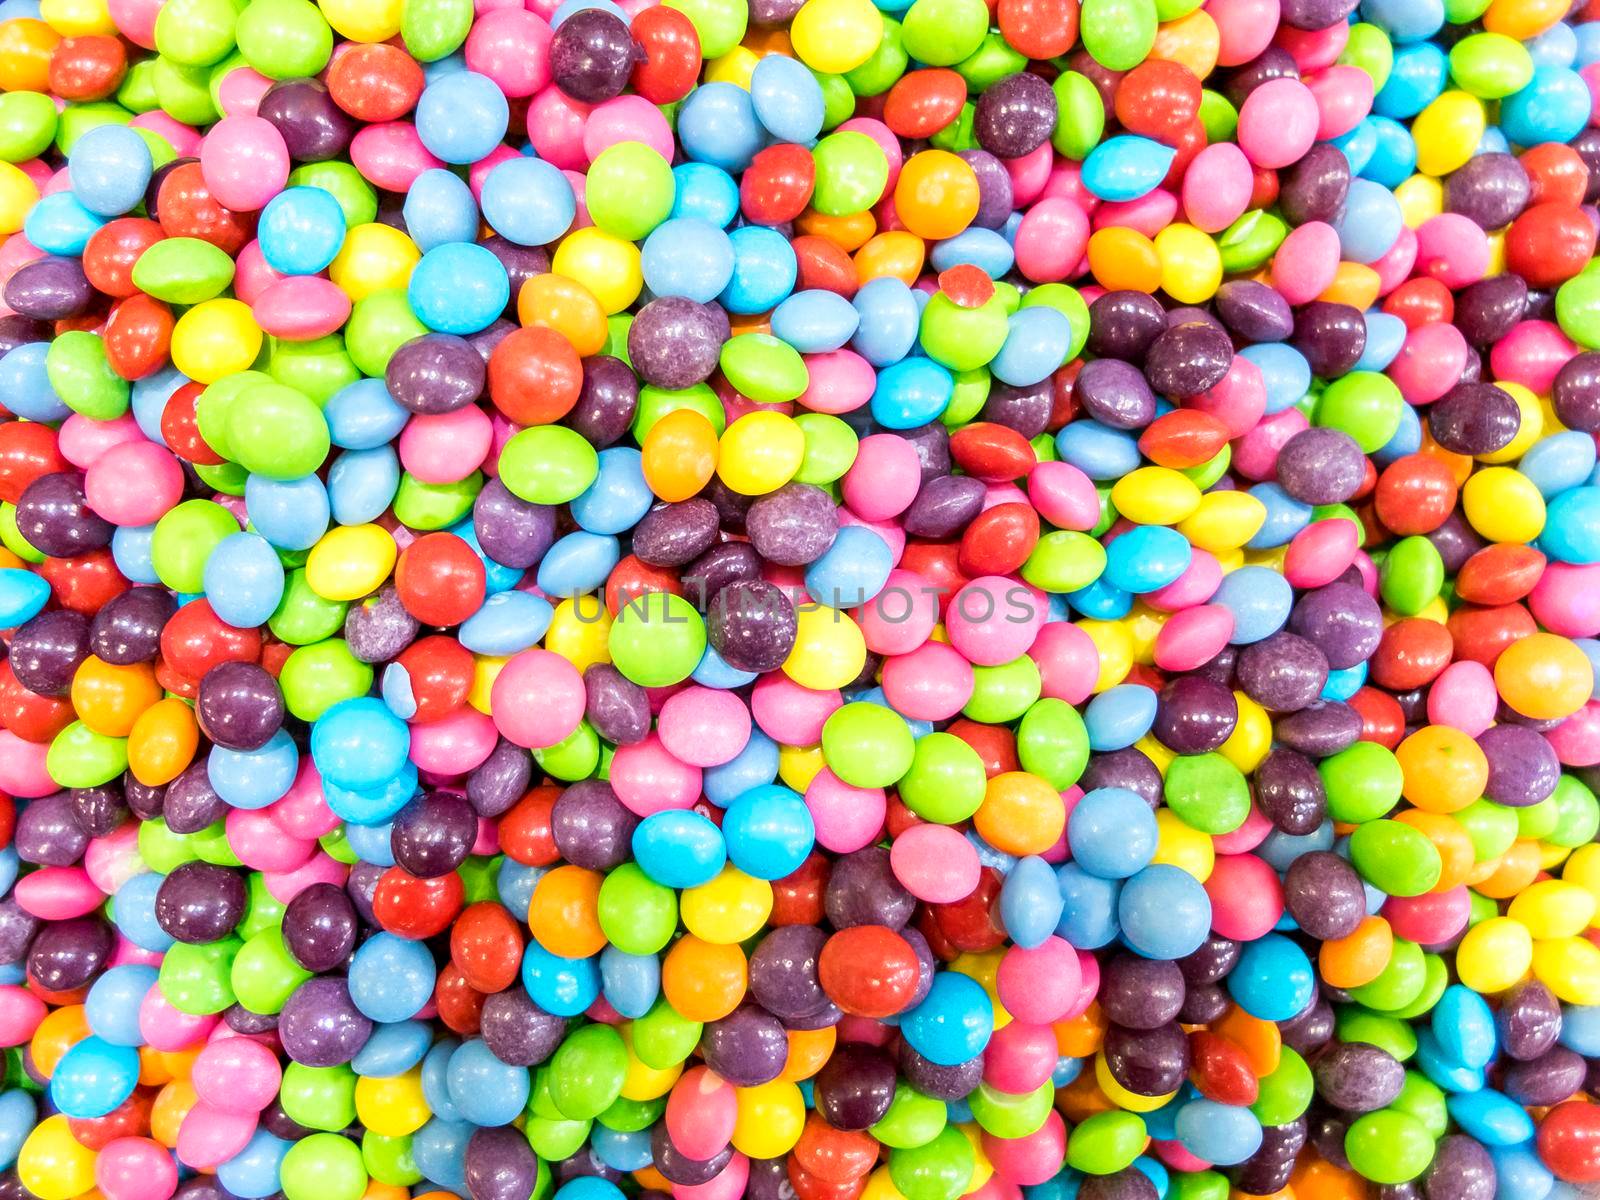 Colorful candies as background, top view